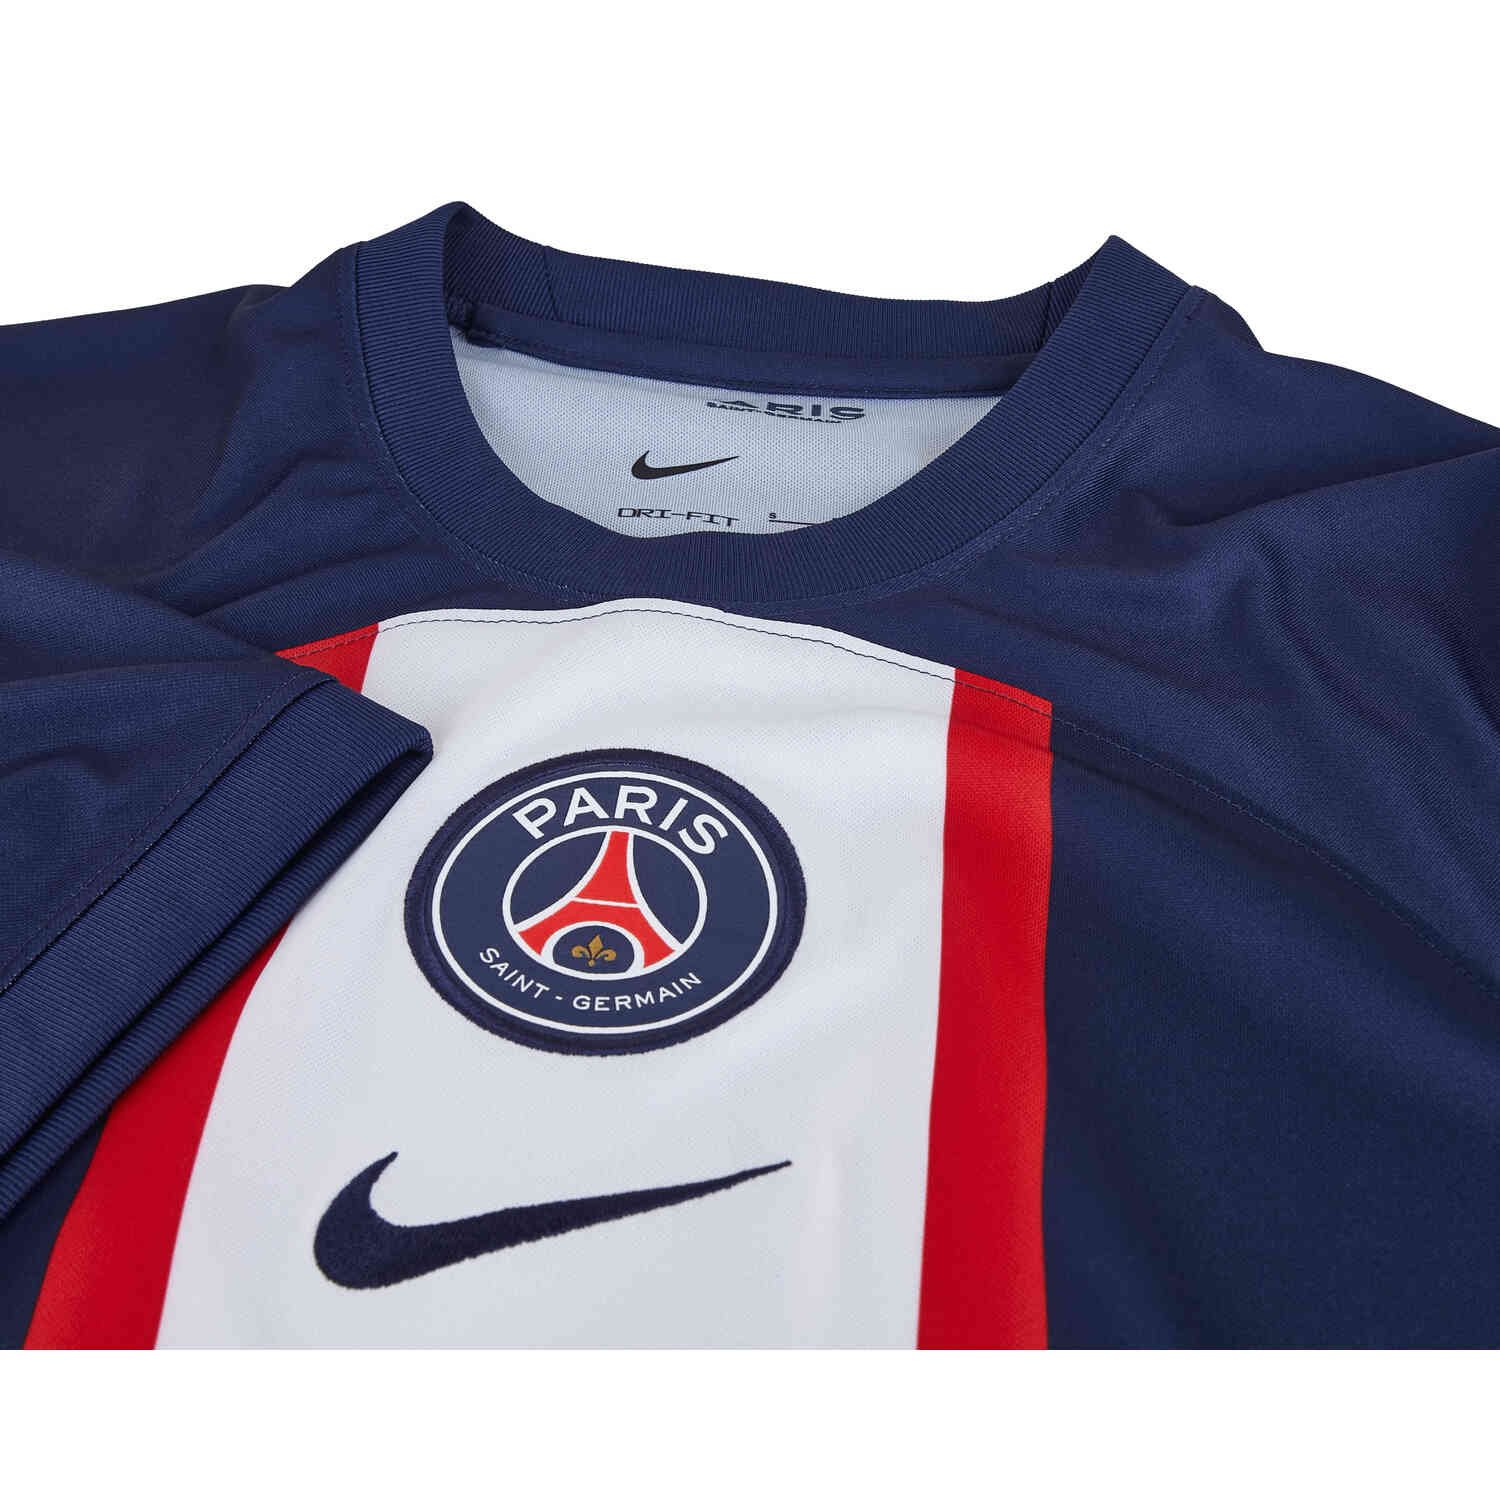 🔥 NO SPONSOR EXPLAINED - Nike 2022-23 PSG Home Jersey Review +